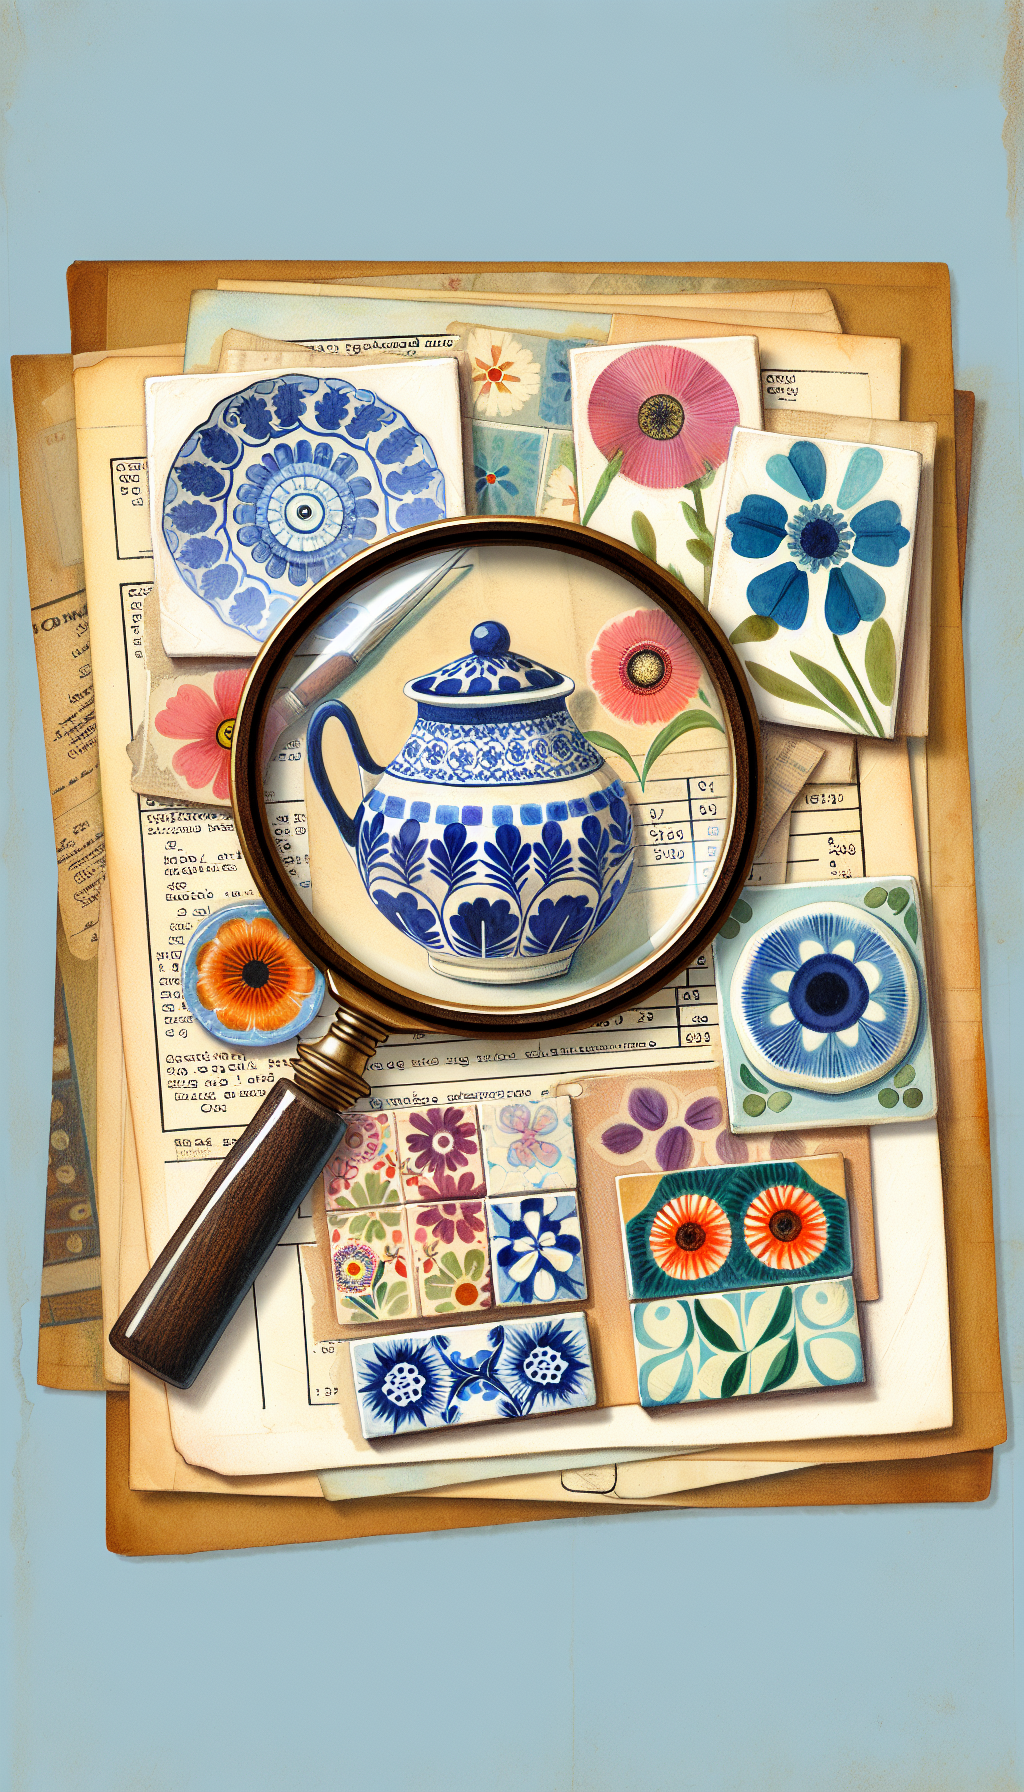 A whimsical, mixed-media collage illustration showcasing a variety of classic CorningWare patterns, like the iconic blue cornflower and the wildflower print, arranged in a detective's magnifying glass. The magnifying glass zooms in on a gleaming piece with a price tag, subtly hinting at high value, against a sepia-toned backdrop of old recipe cards and kitchen scenes, suggesting a nostalgic search through history.